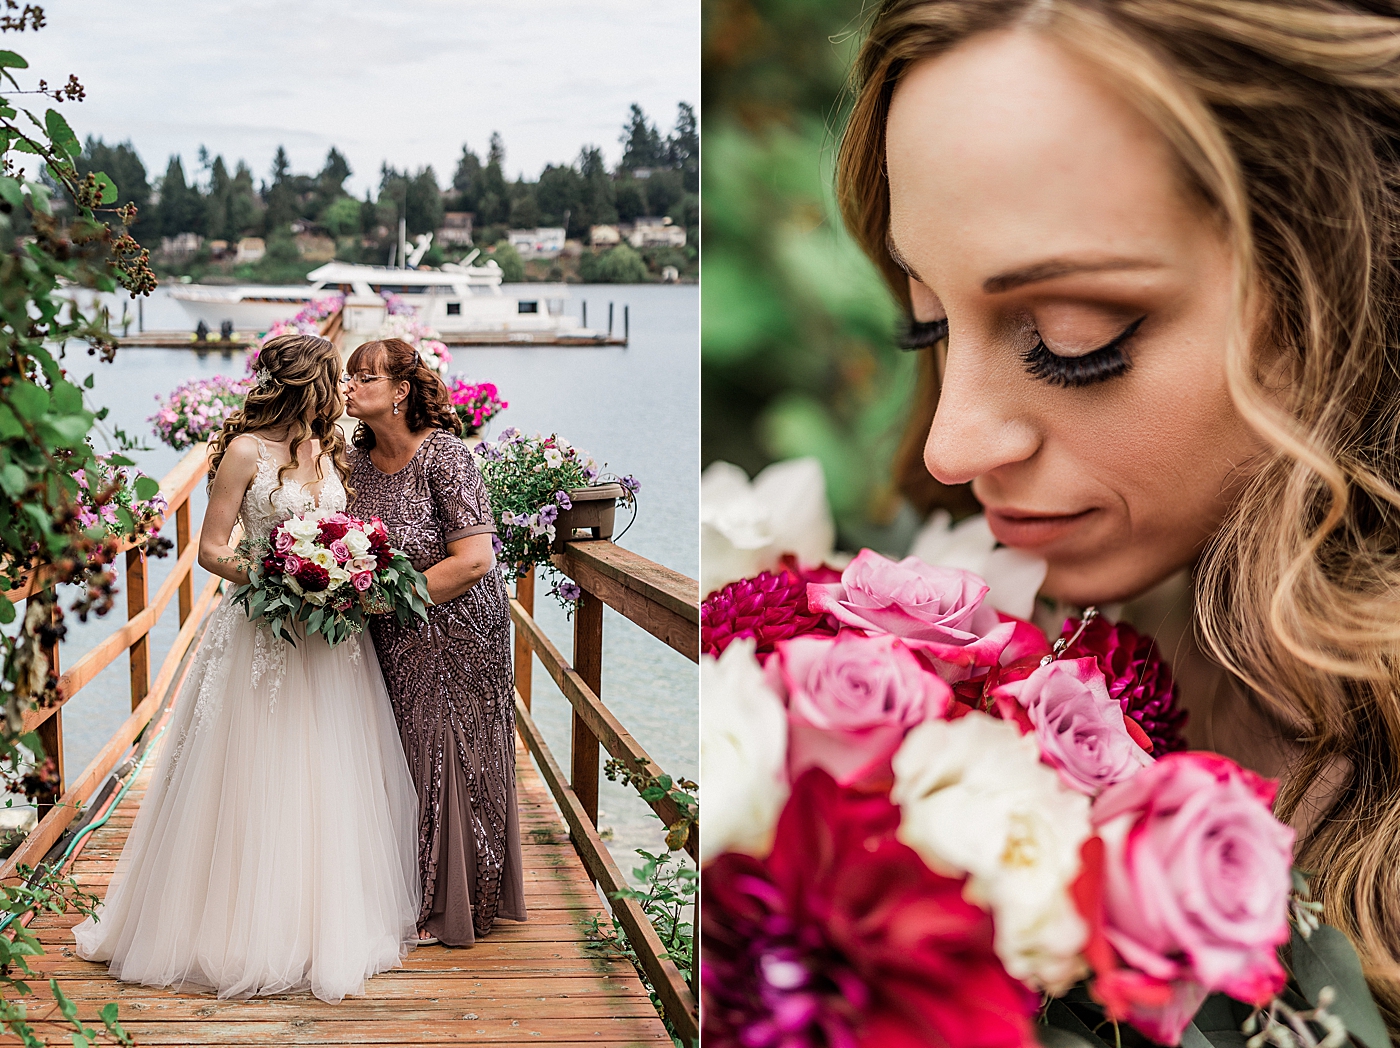 Bridal Portraits at Cedar Springs in Port Orchard, WA. Photographed by Tacoma Wedding Photographer, Megan Montalvo Photography. 